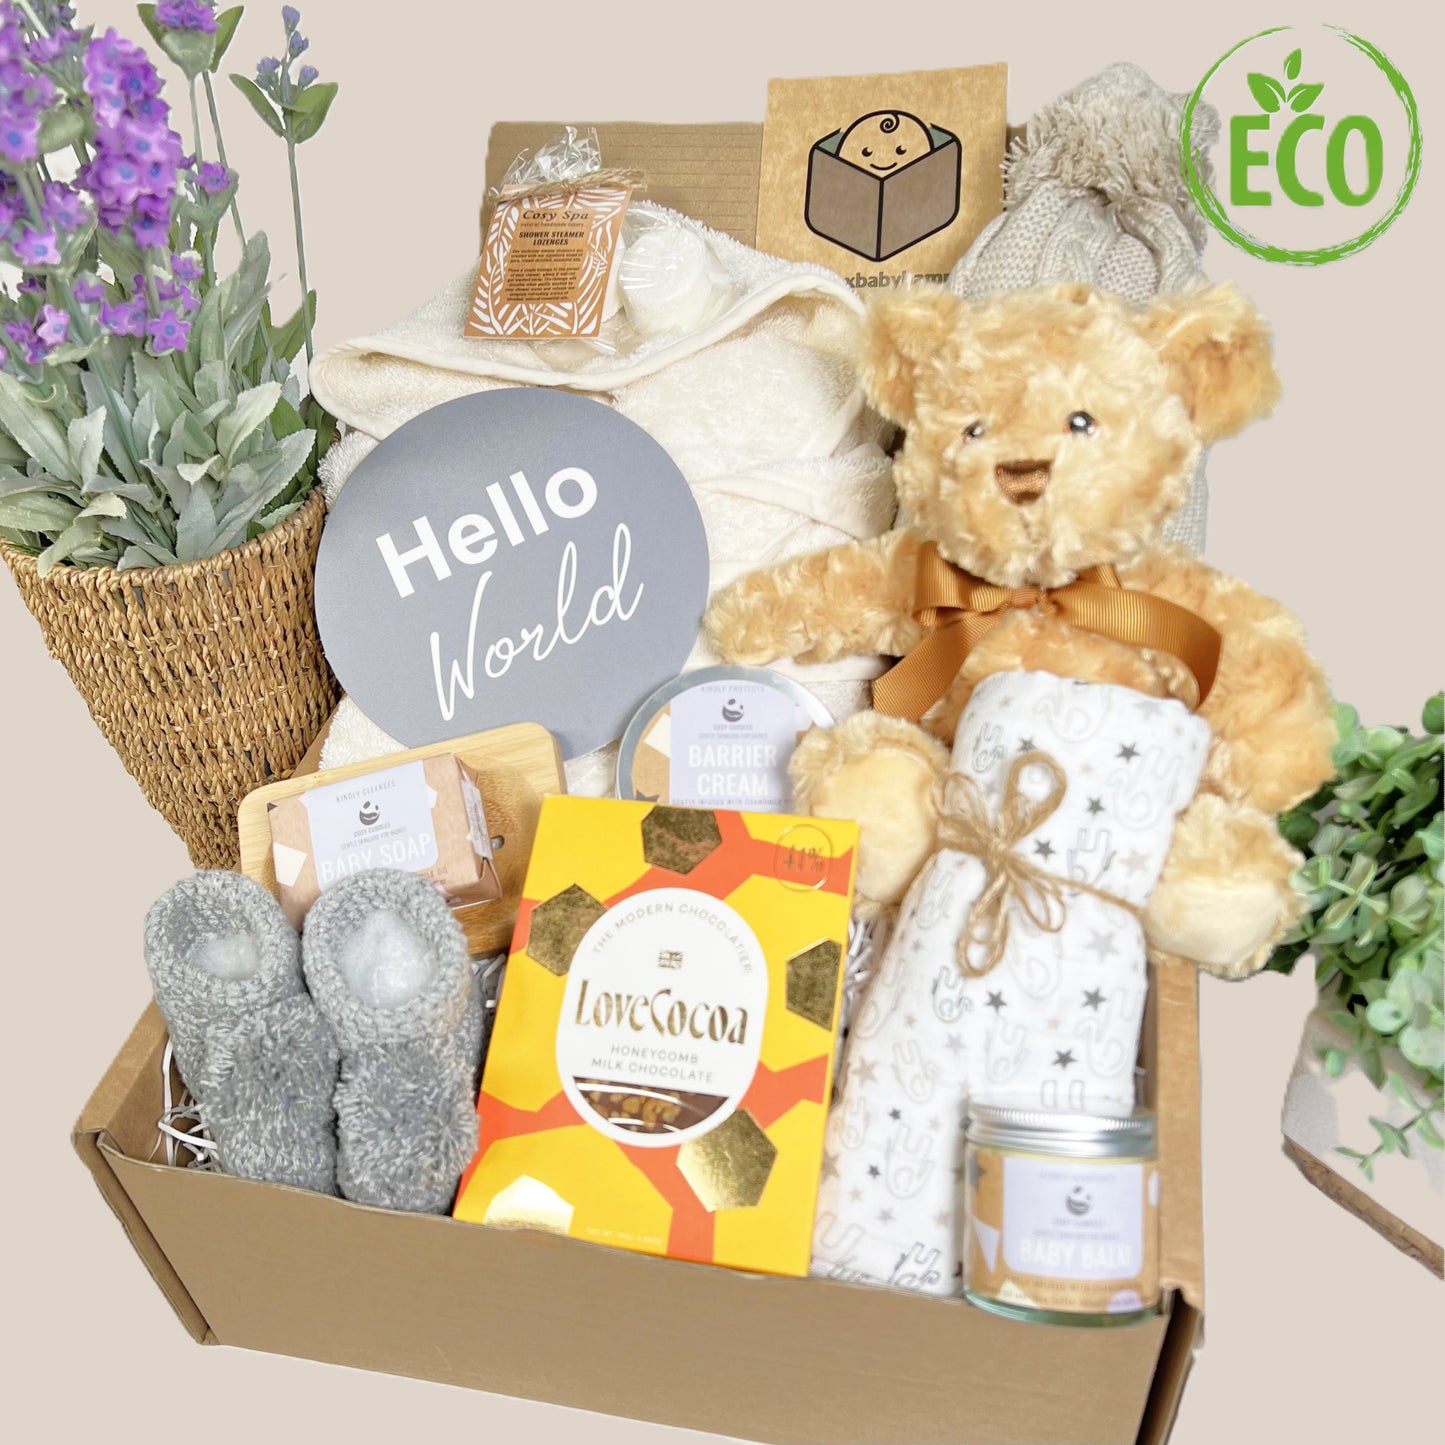 Gorgeous neutral new mummy and baby hamper containing eco friendly baby toiletries, a cotton baby dressing gown with hood, an eco friendly teddy bear baby toy, a baby pompom hat, a bar of chocolate and some shower spa steamers for Mummy, a pair of hand crocheted baby booties with pompoms,q muslin square and a "Hello World" plaque.